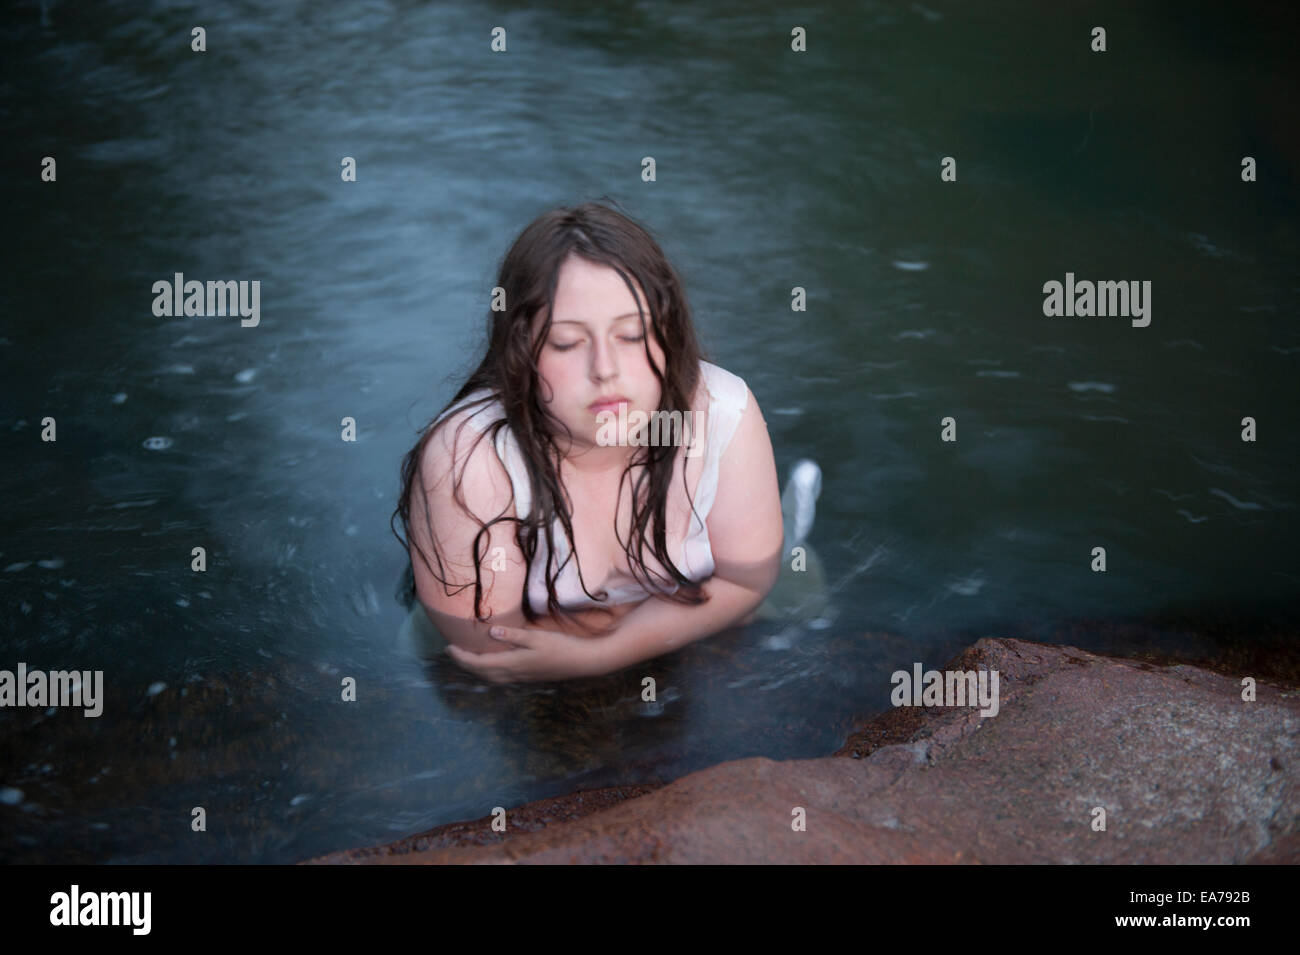 Portrait of pre-teen girl (10-12) with wet hair half-submerged in river waters Stock Photo